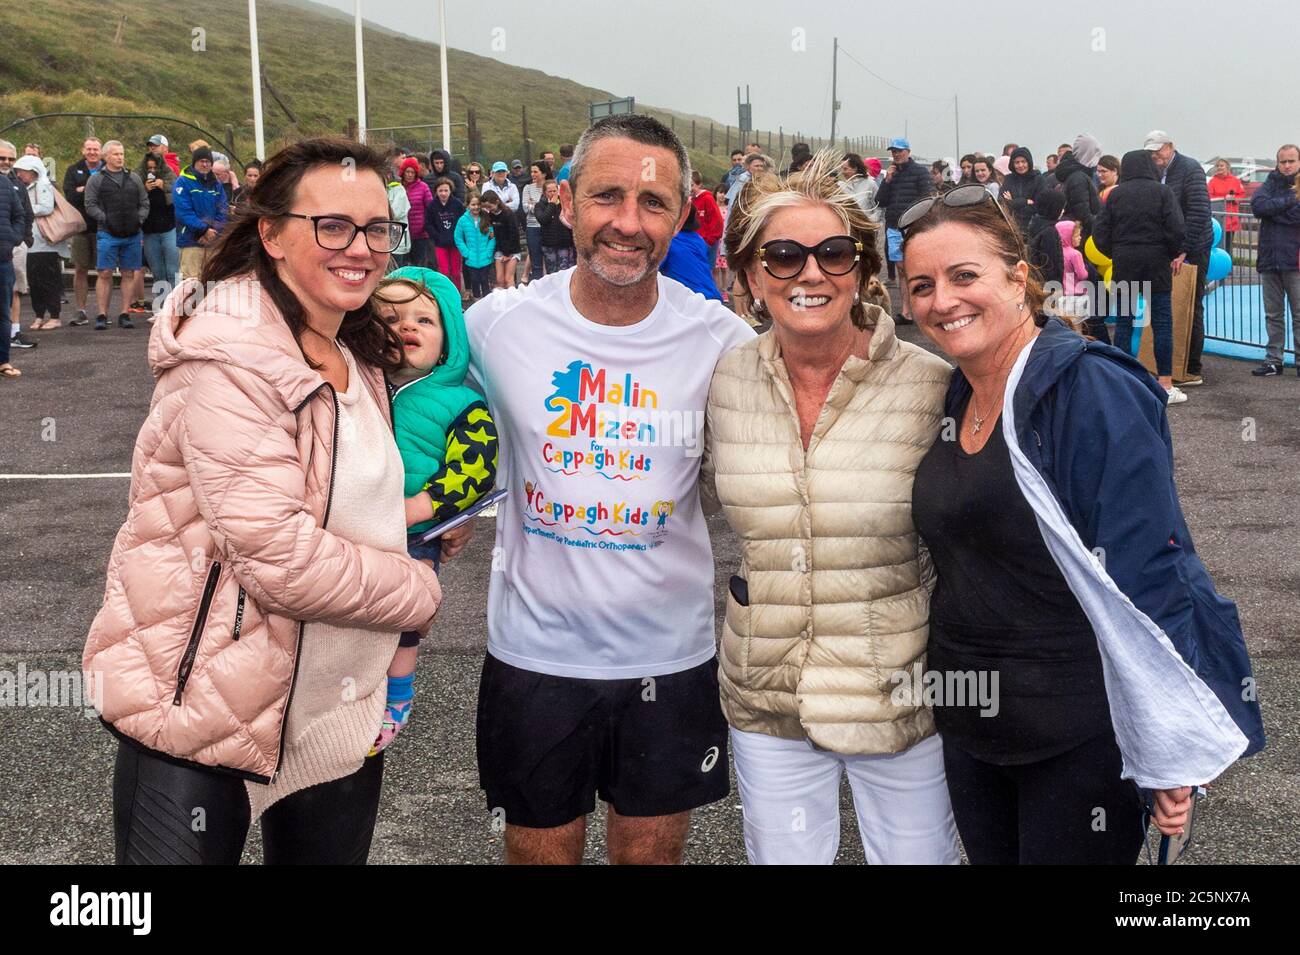 West Cork, Ireland. 4th July, 2020. Barry Sheehan, who lives in Cork, has ran 600 kms from Malin to Mizen Head in aid of the new children's unit 'Cappagh Kids' of National Orthopaedic Hospital, Cappagh, Dublin. Barry is pictured with his mum and two sisters after crossing the finish line. Credit: AG News/Alamy Live News Stock Photo